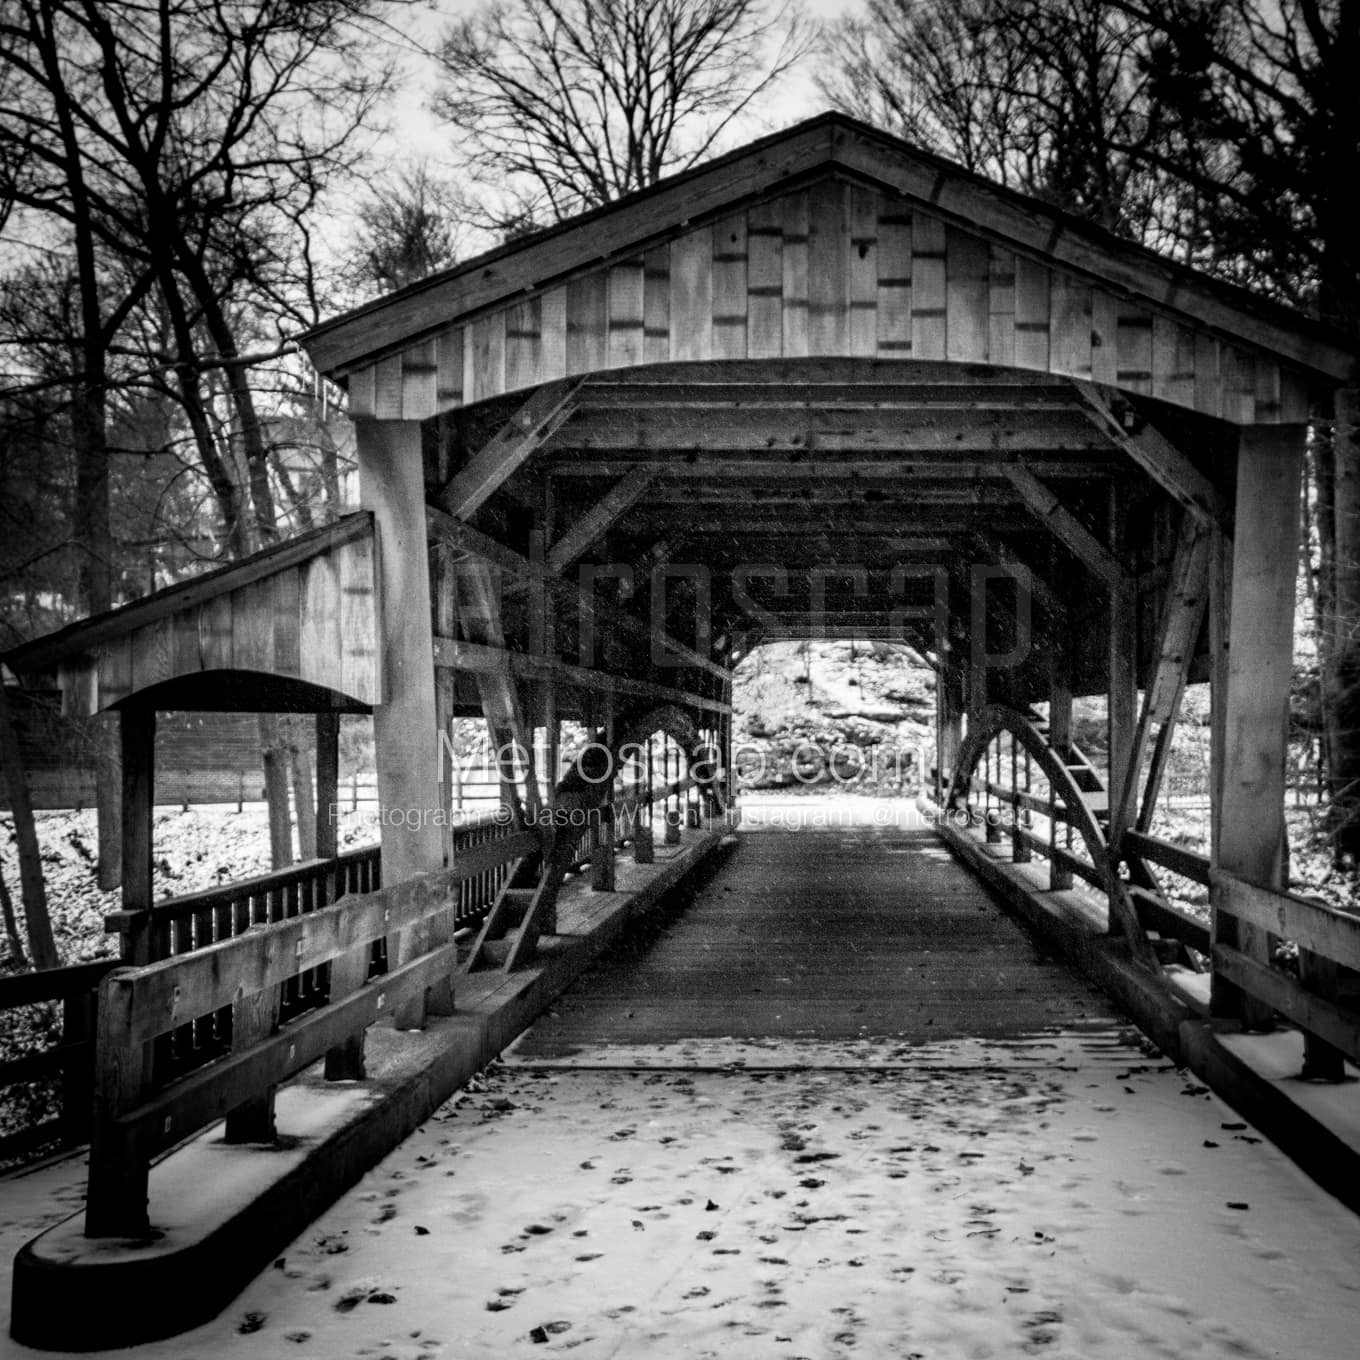 Youngstown Black & White Landscape Photography